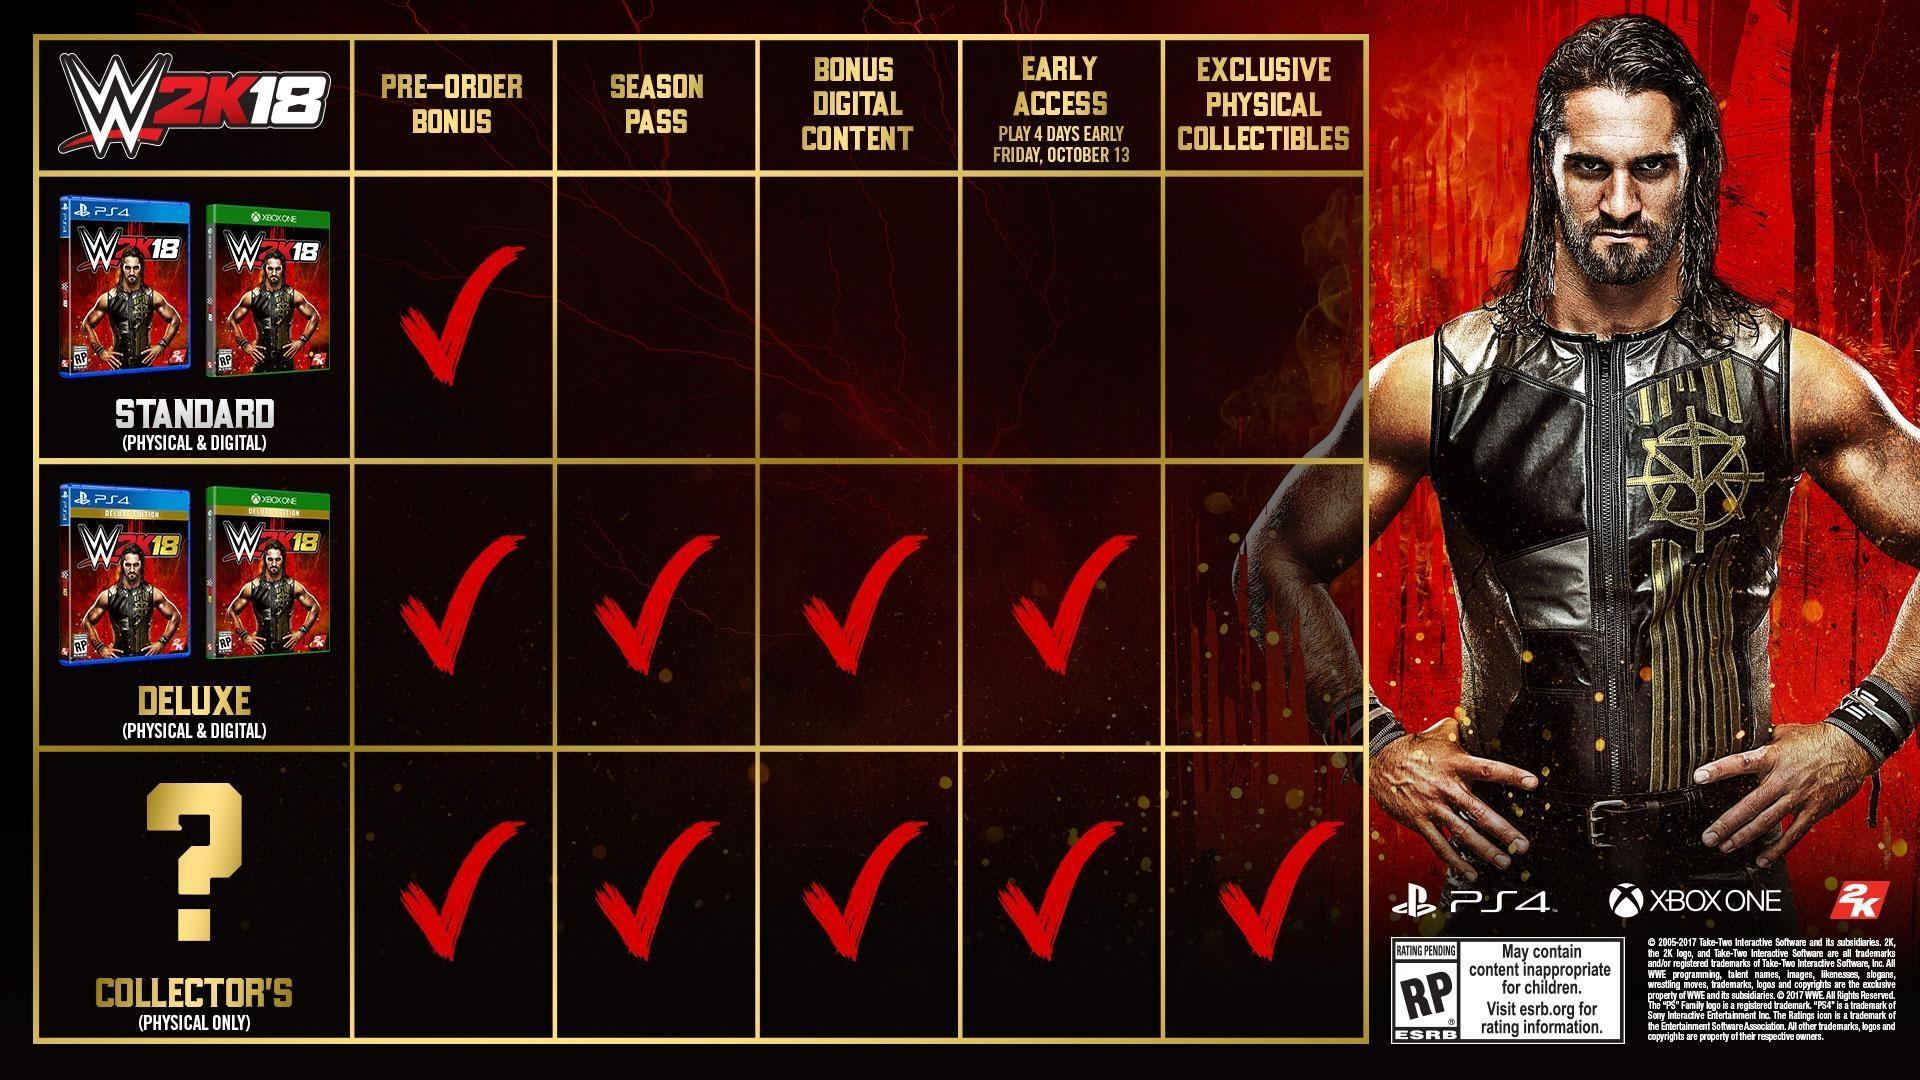 WWE 2K18 Editions Infographic - Standard Deluxe Collectors